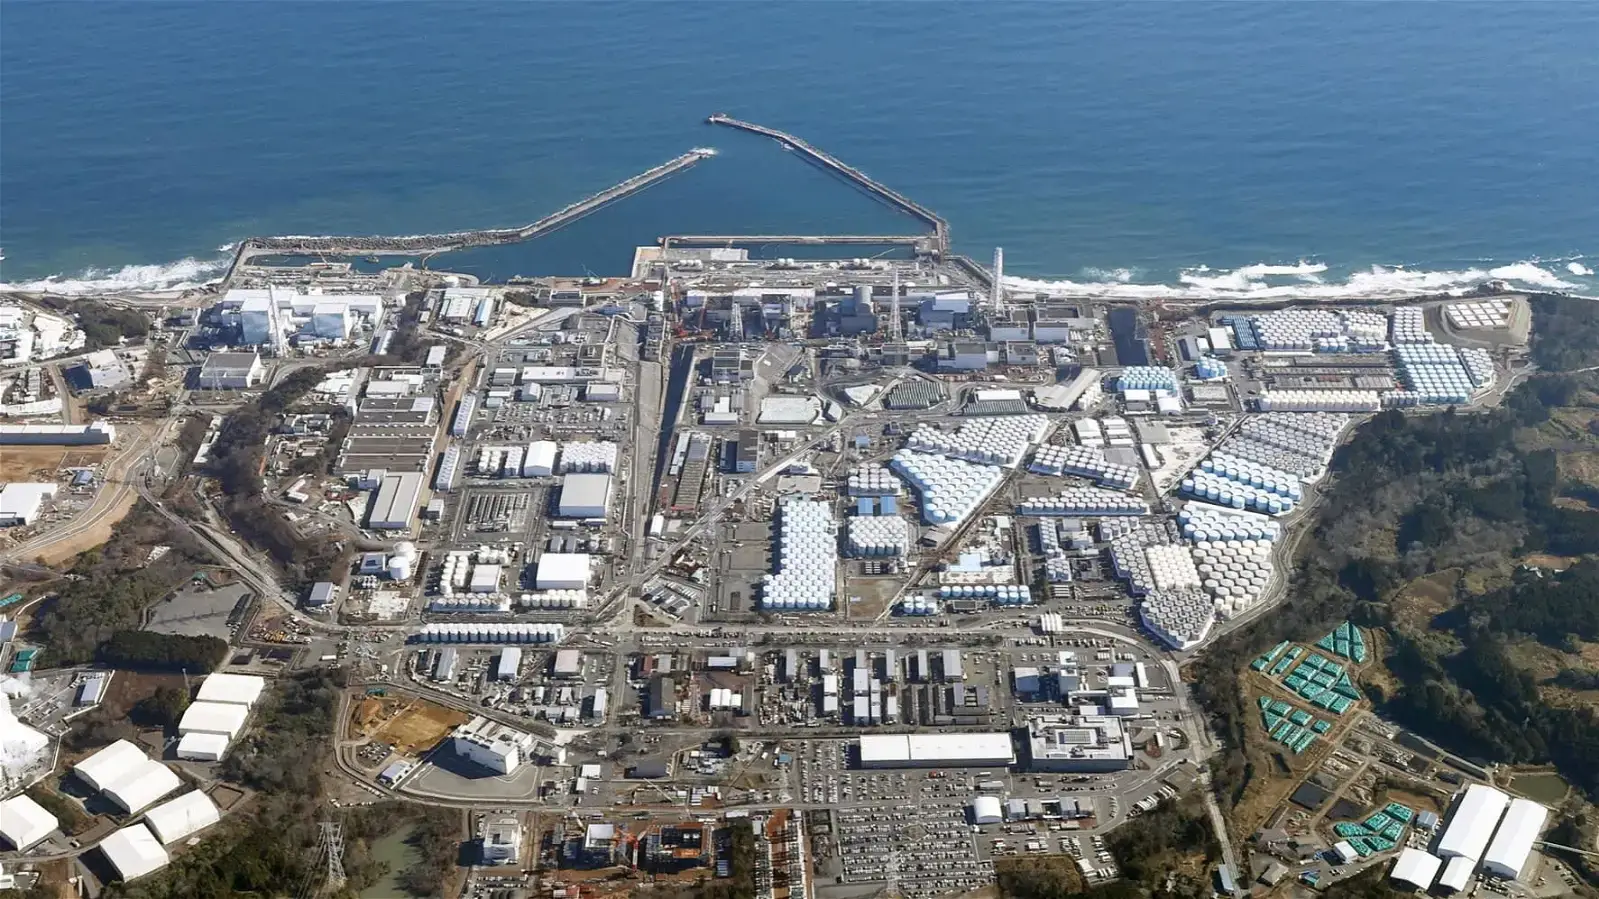 How risky is Japan’s release of radioactive water from Fukushima?